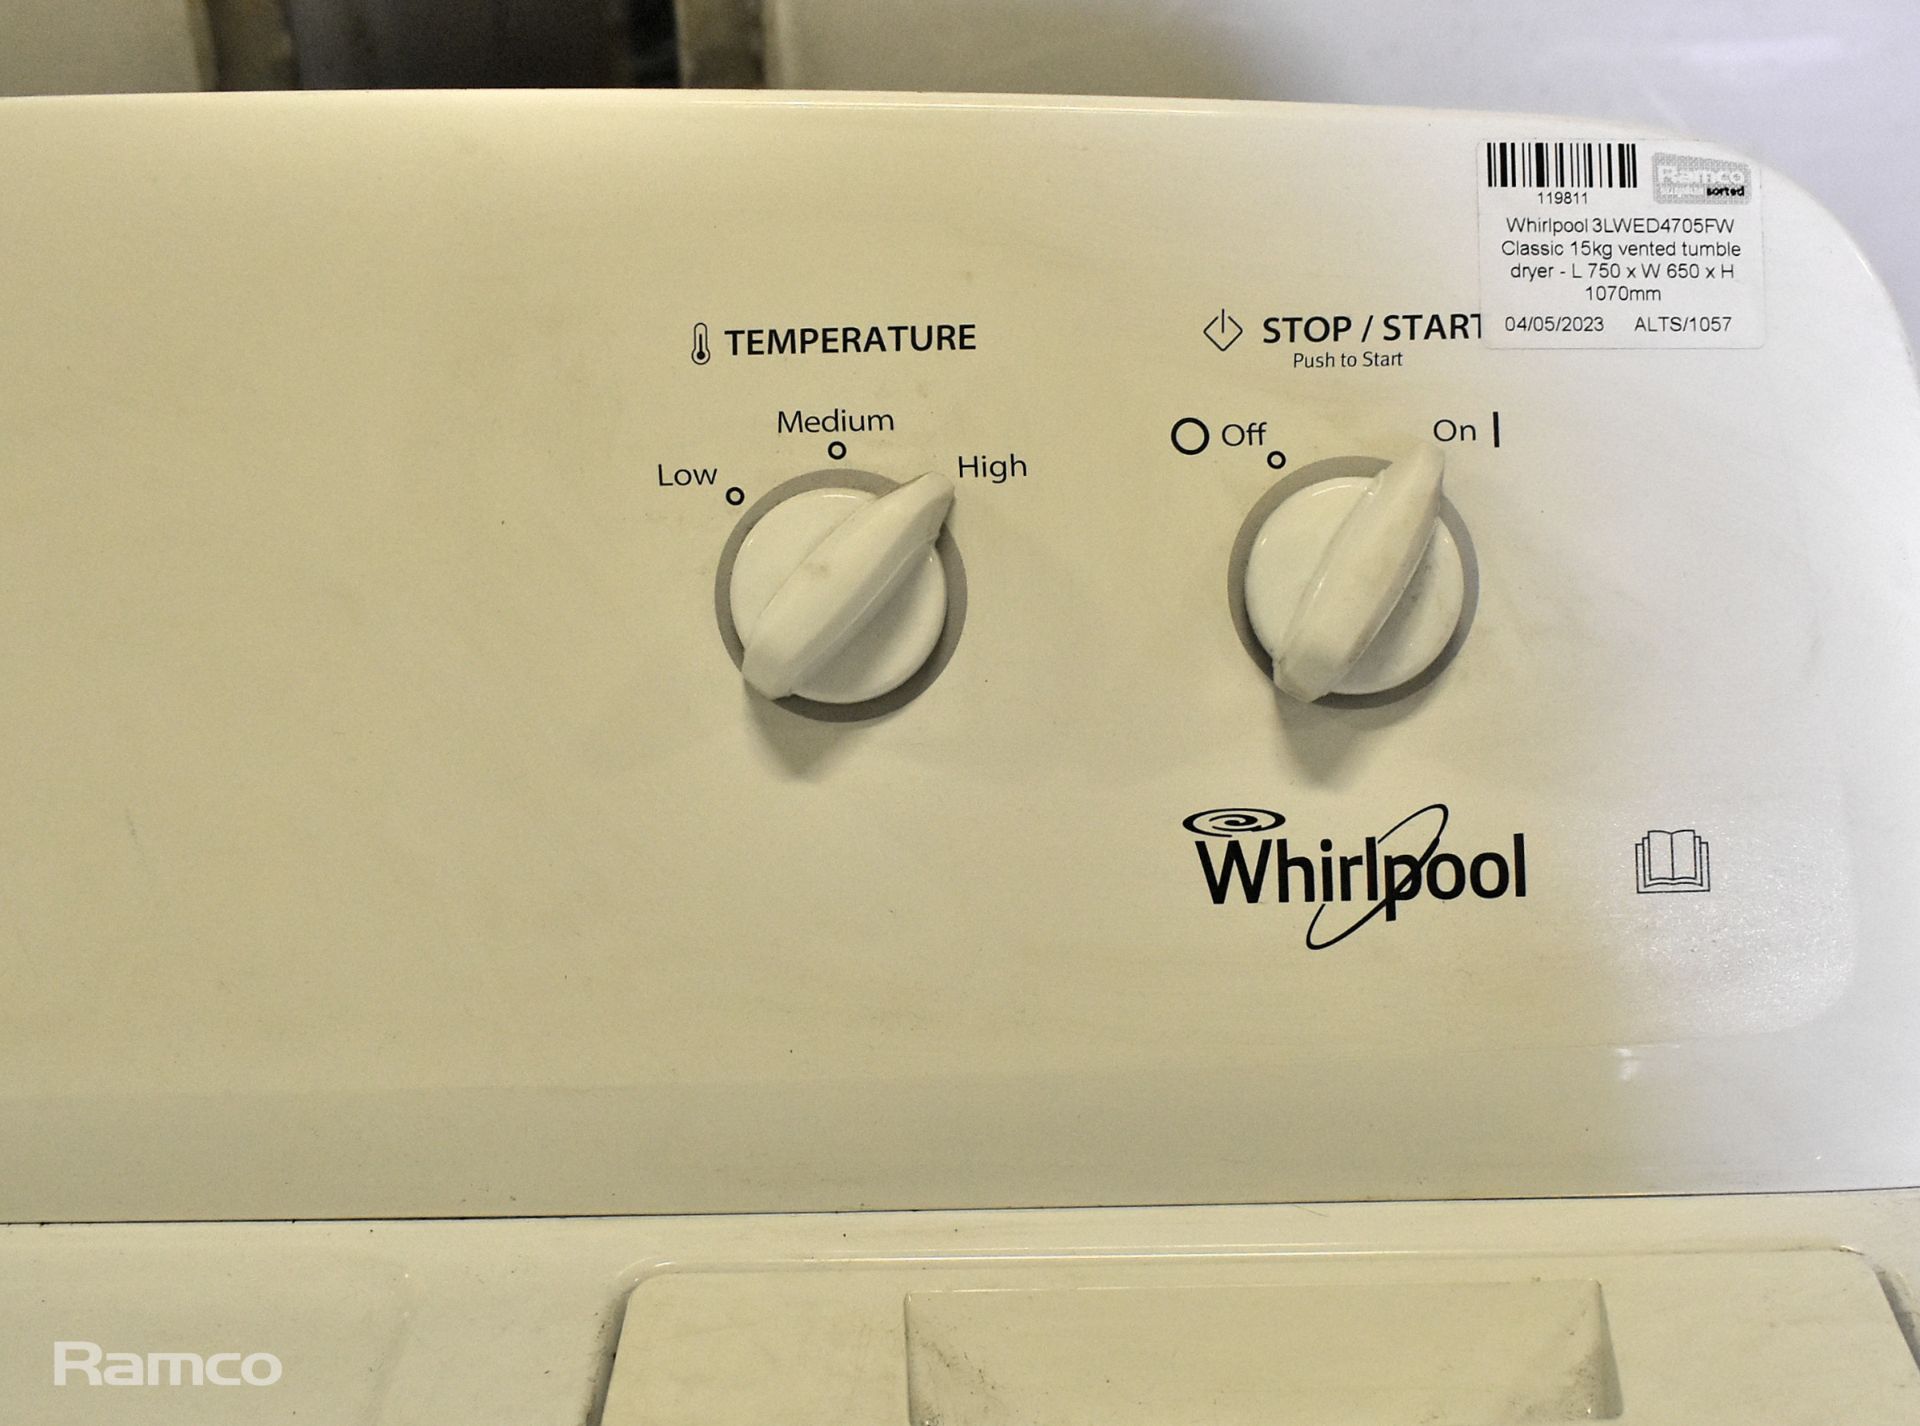 Whirlpool 3LWED4705FW Classic 15kg vented tumble dryer - L 750 x W 650 x H 1070mm - Image 3 of 5